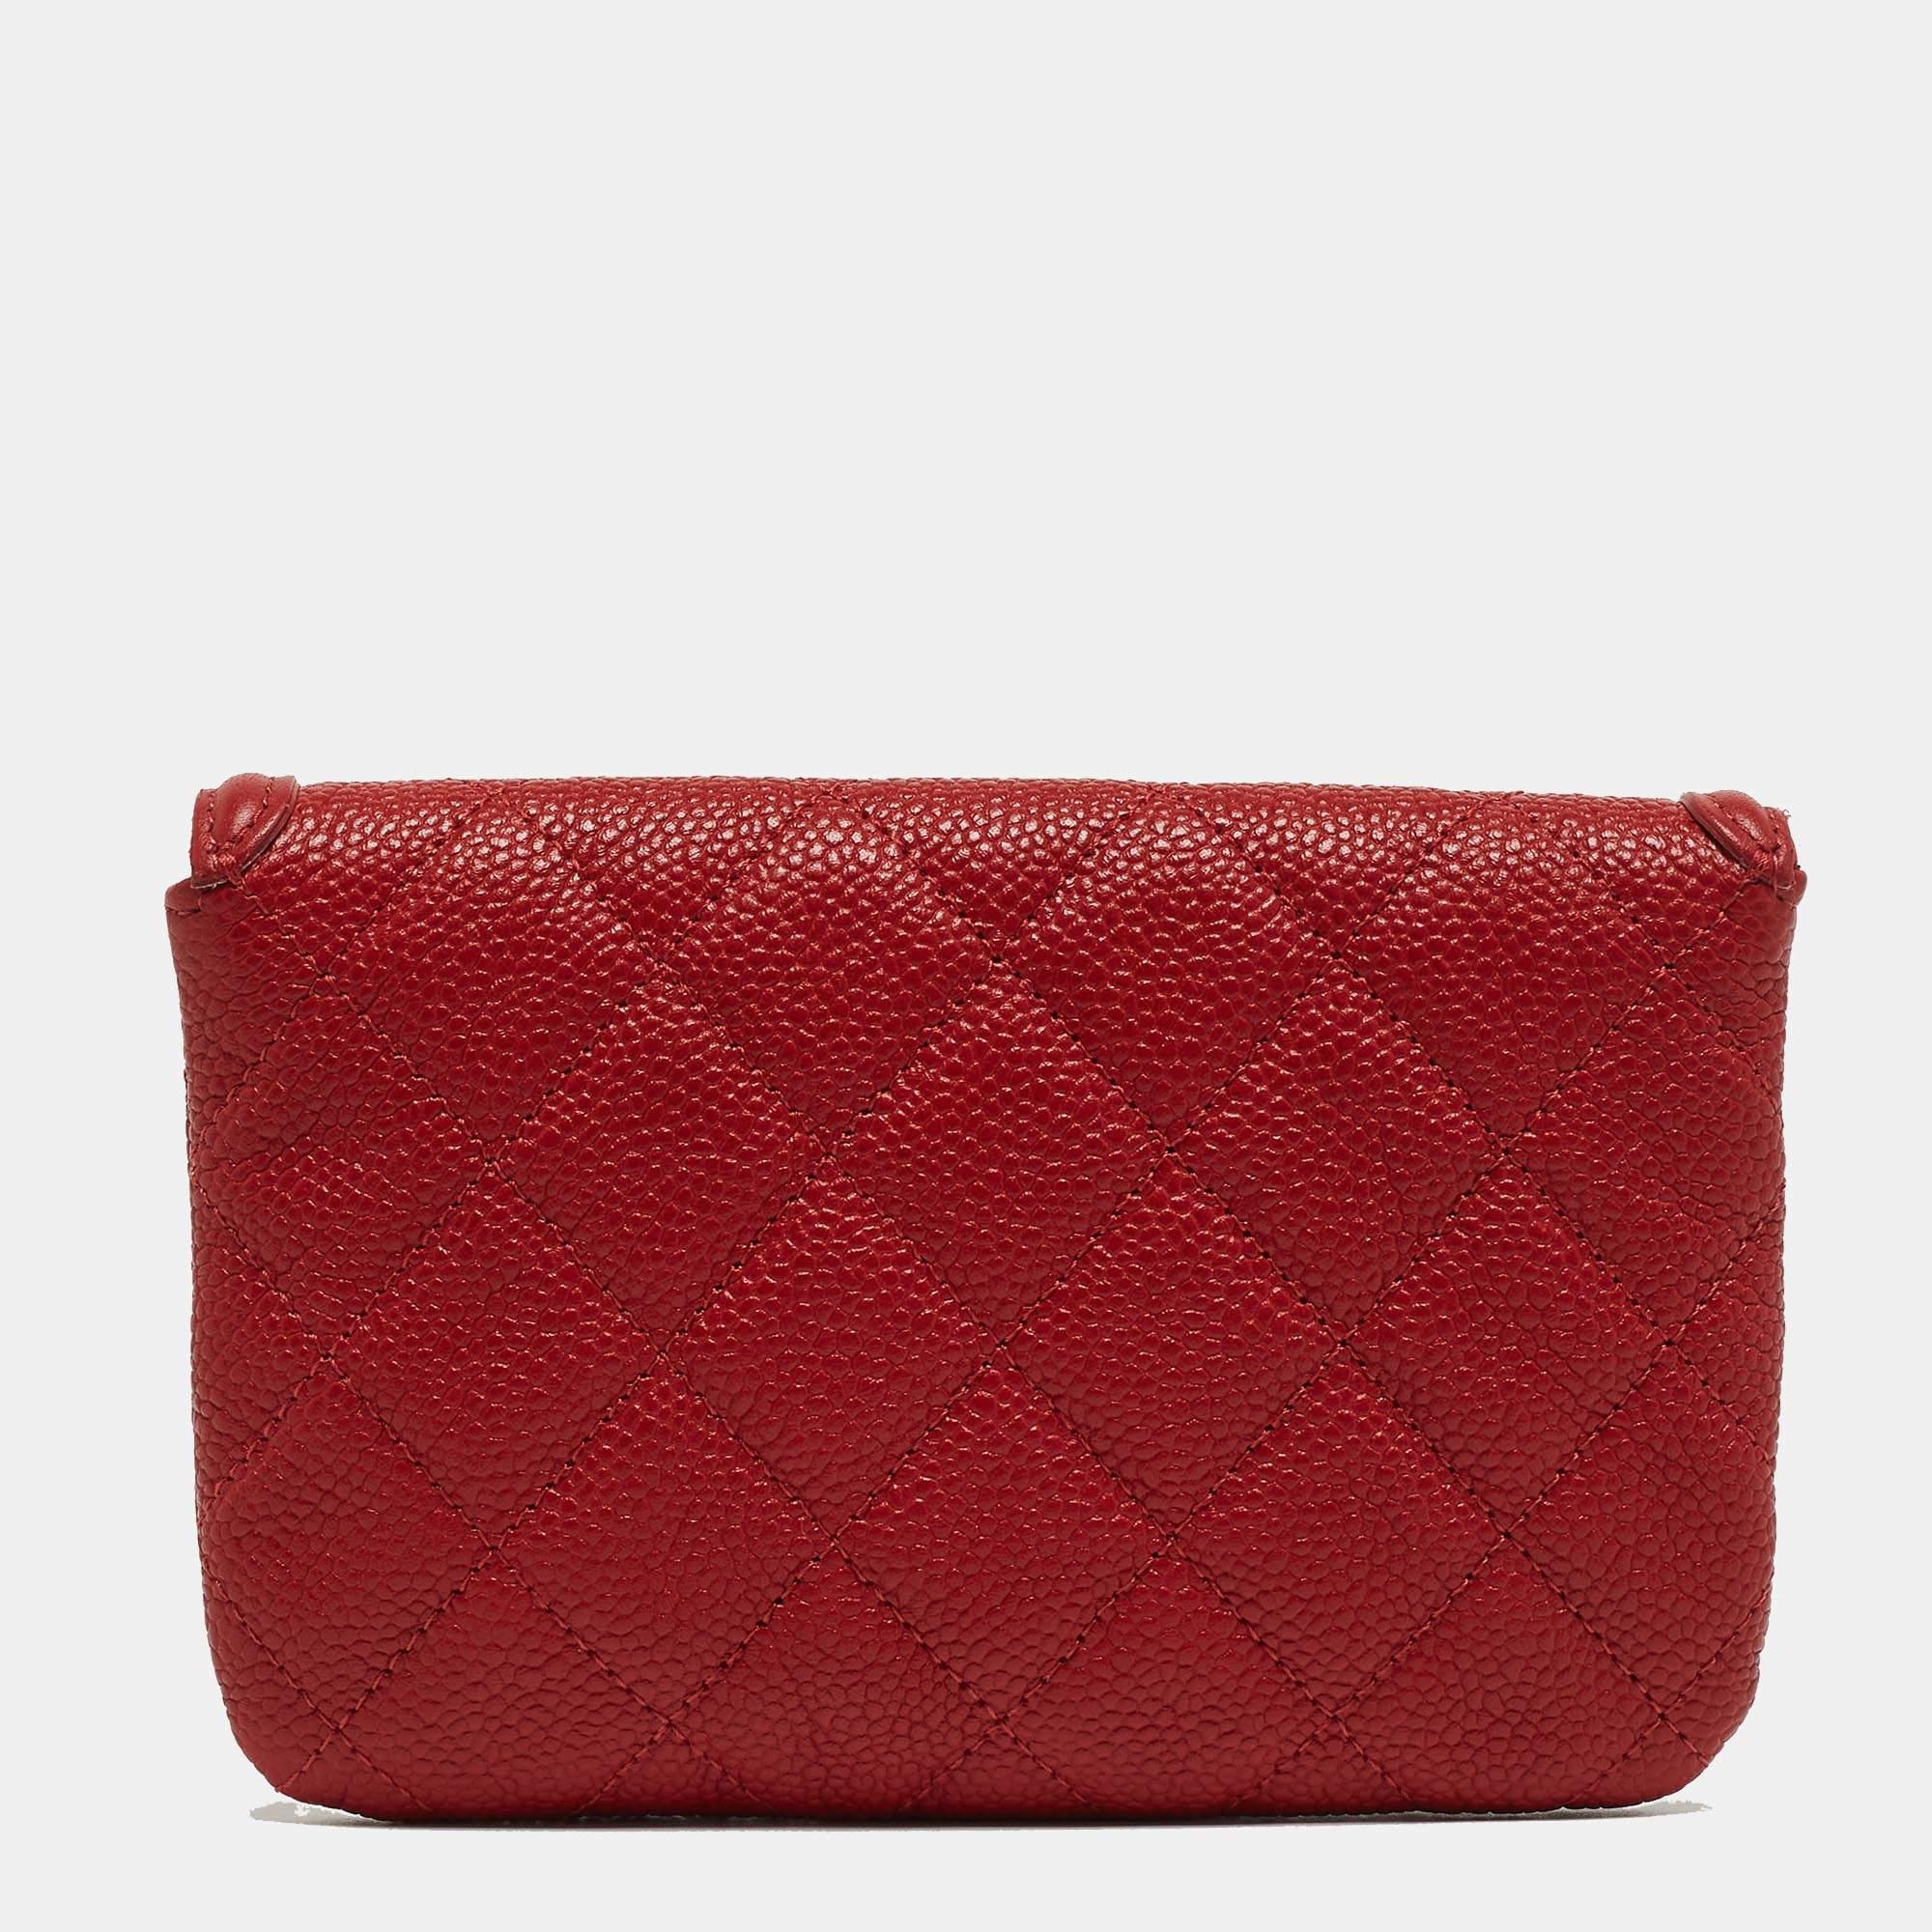 This Chanel wallet is an immaculate balance of sophistication and rational utility. It has been designed using prime quality materials and elevated by a sleek finish. The creation is equipped with ample space for your monetary essentials.

Includes: